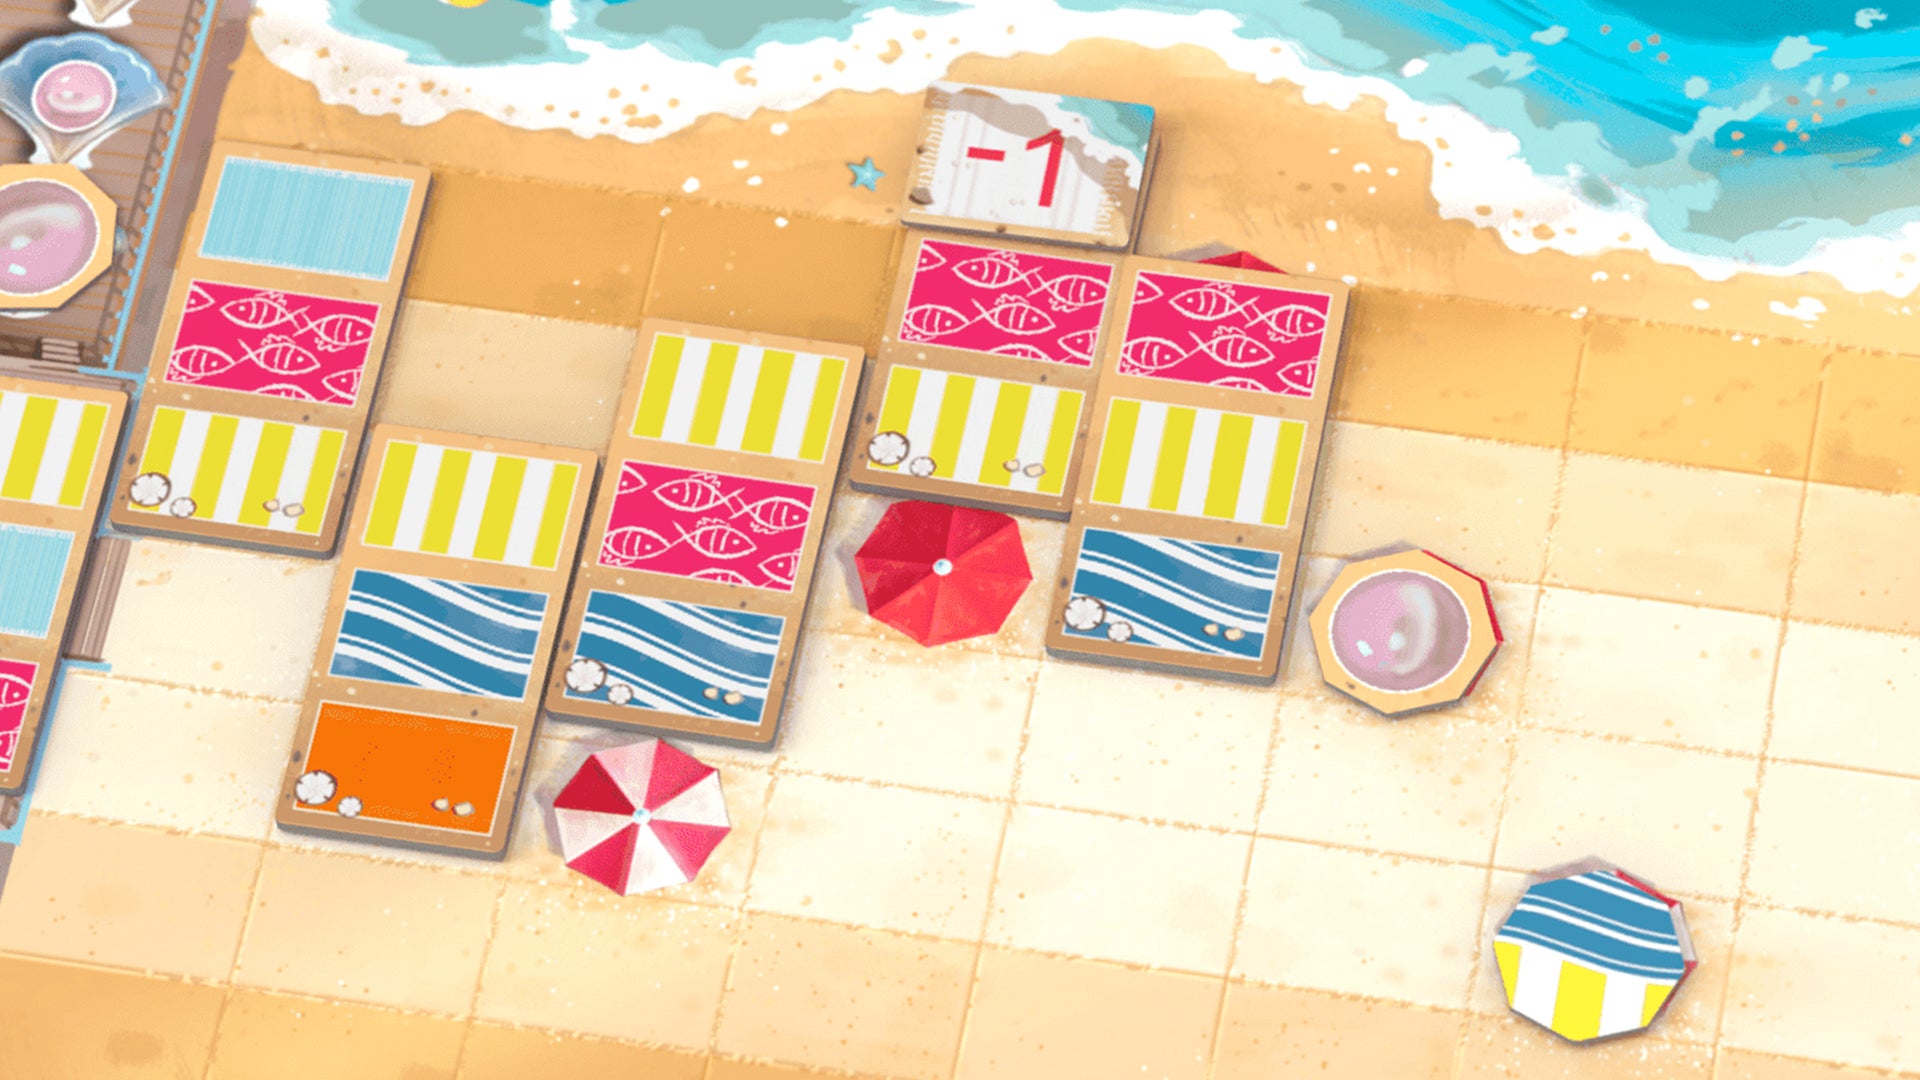 Image for Azul studio’s next board game Maui challenges you to find the perfect spot on the beach